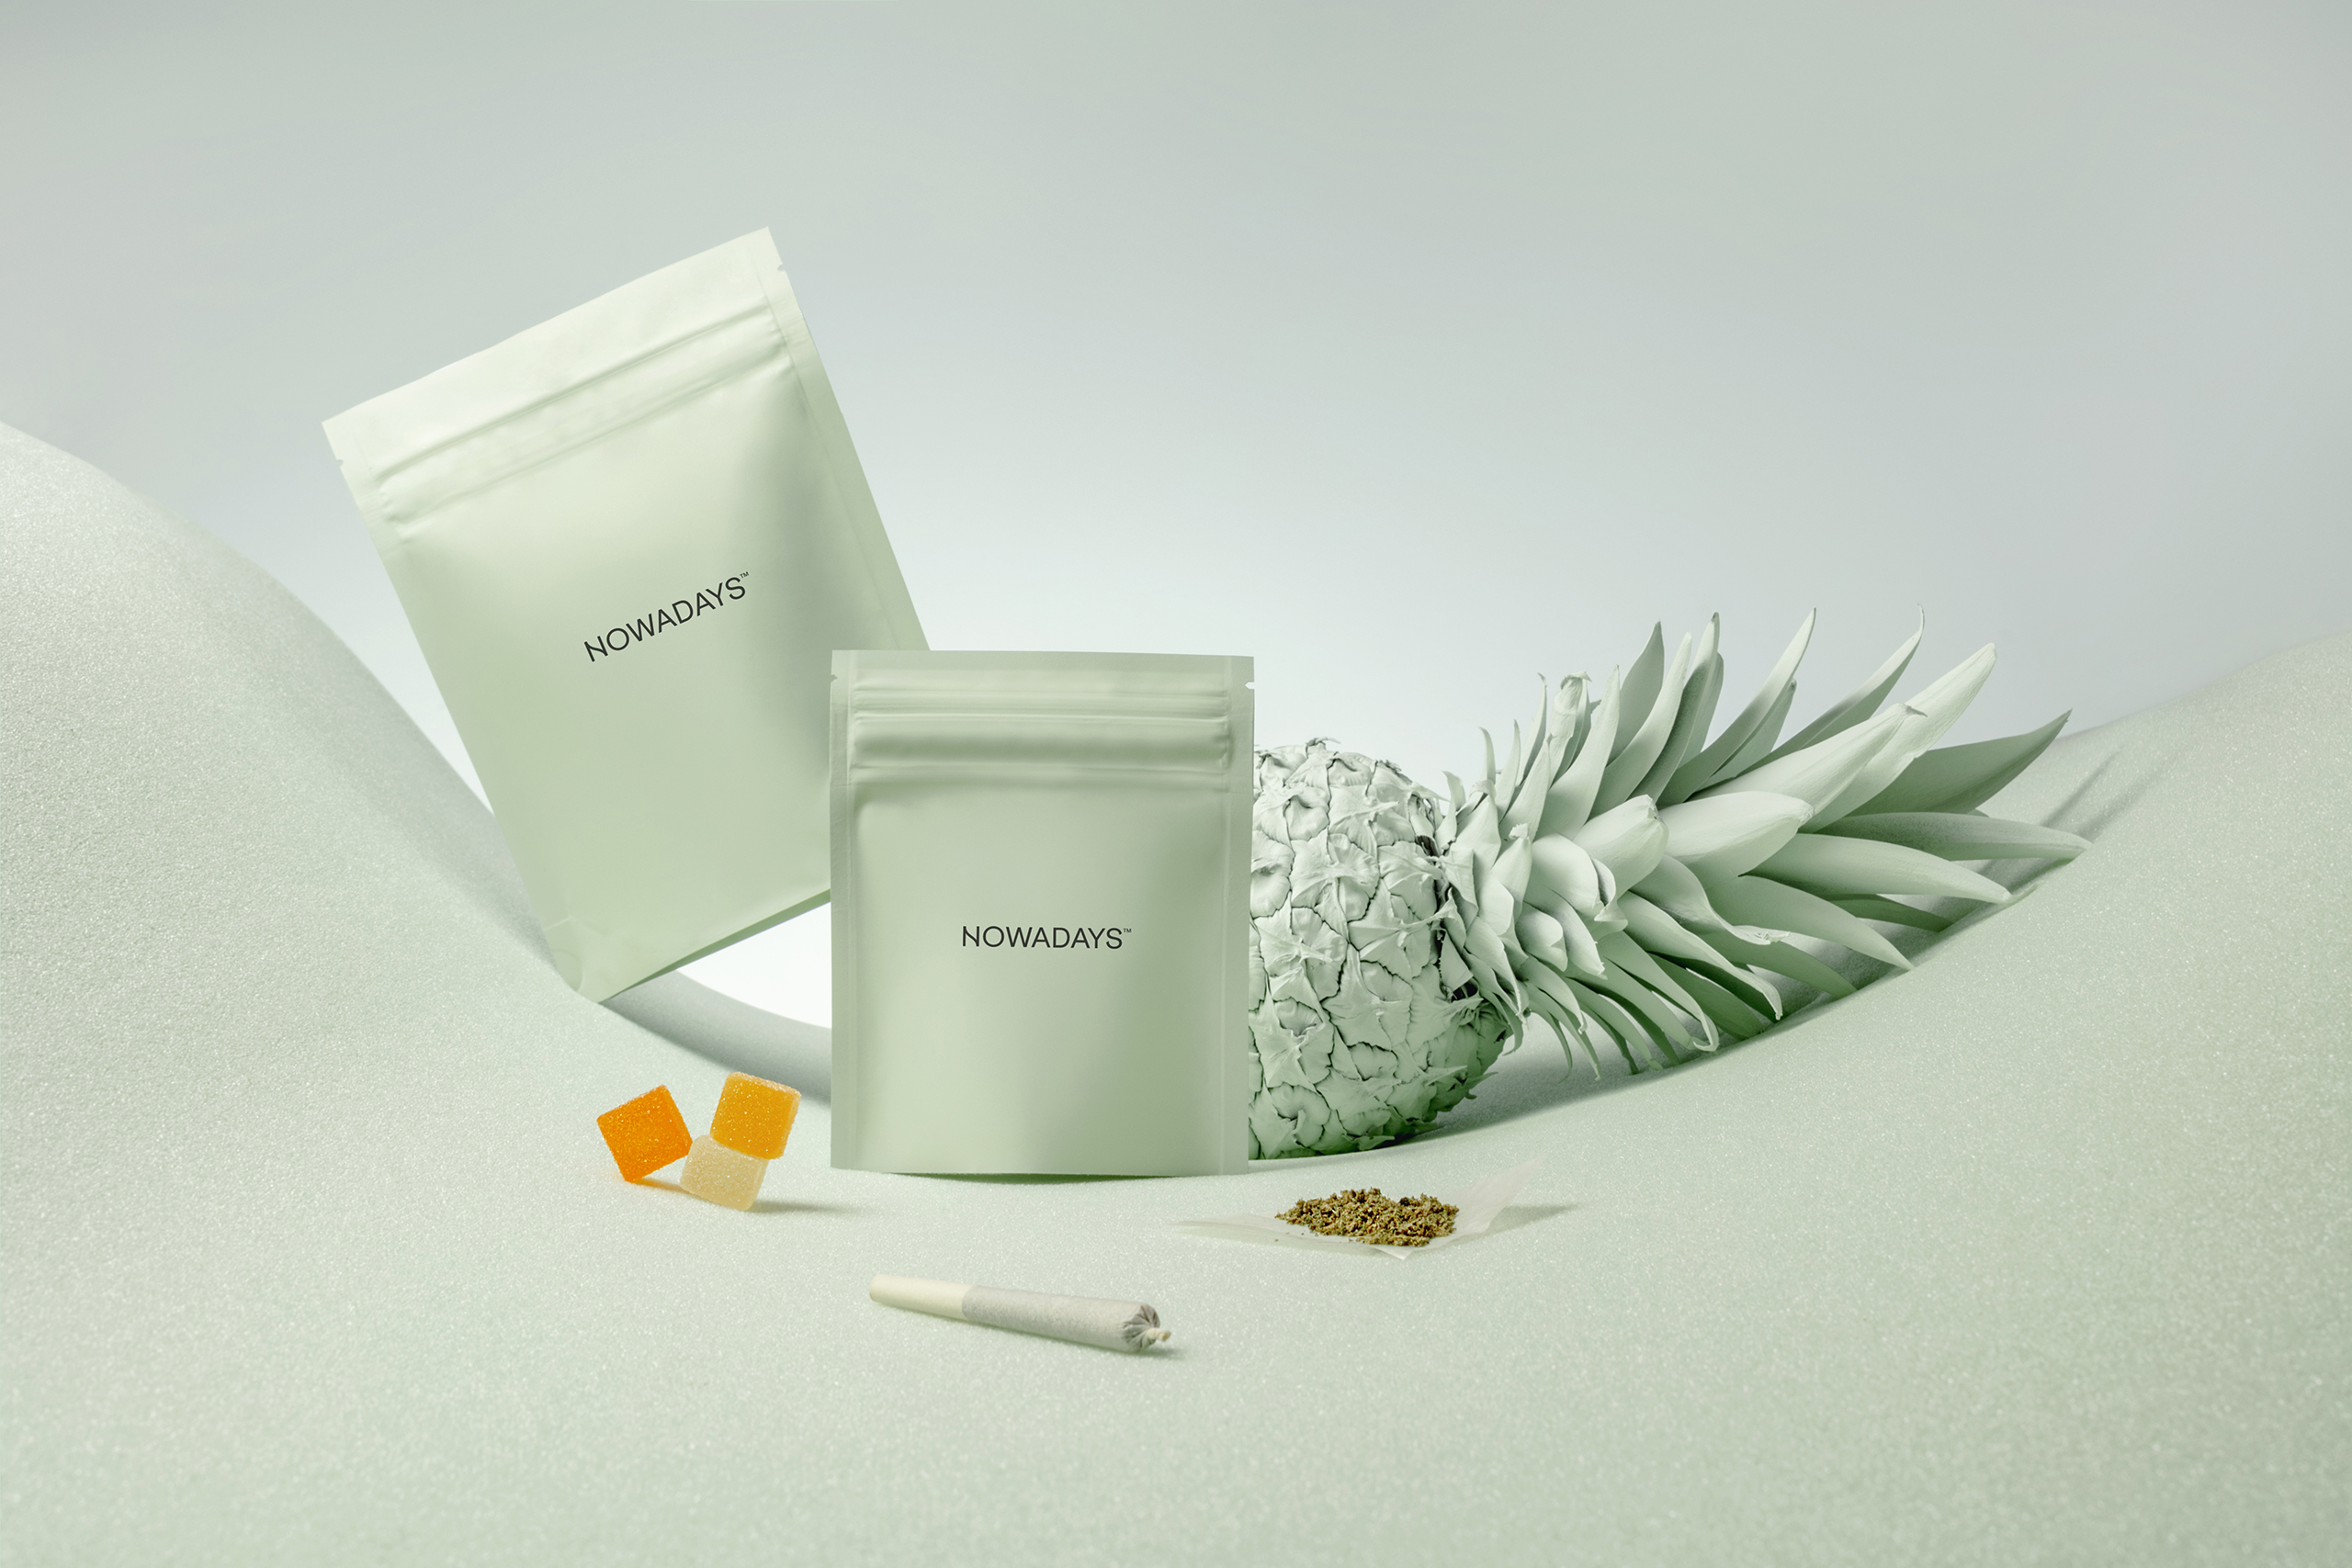 Pure Sunfarms launches Nowadays, a collection of CBD products designed for daily living